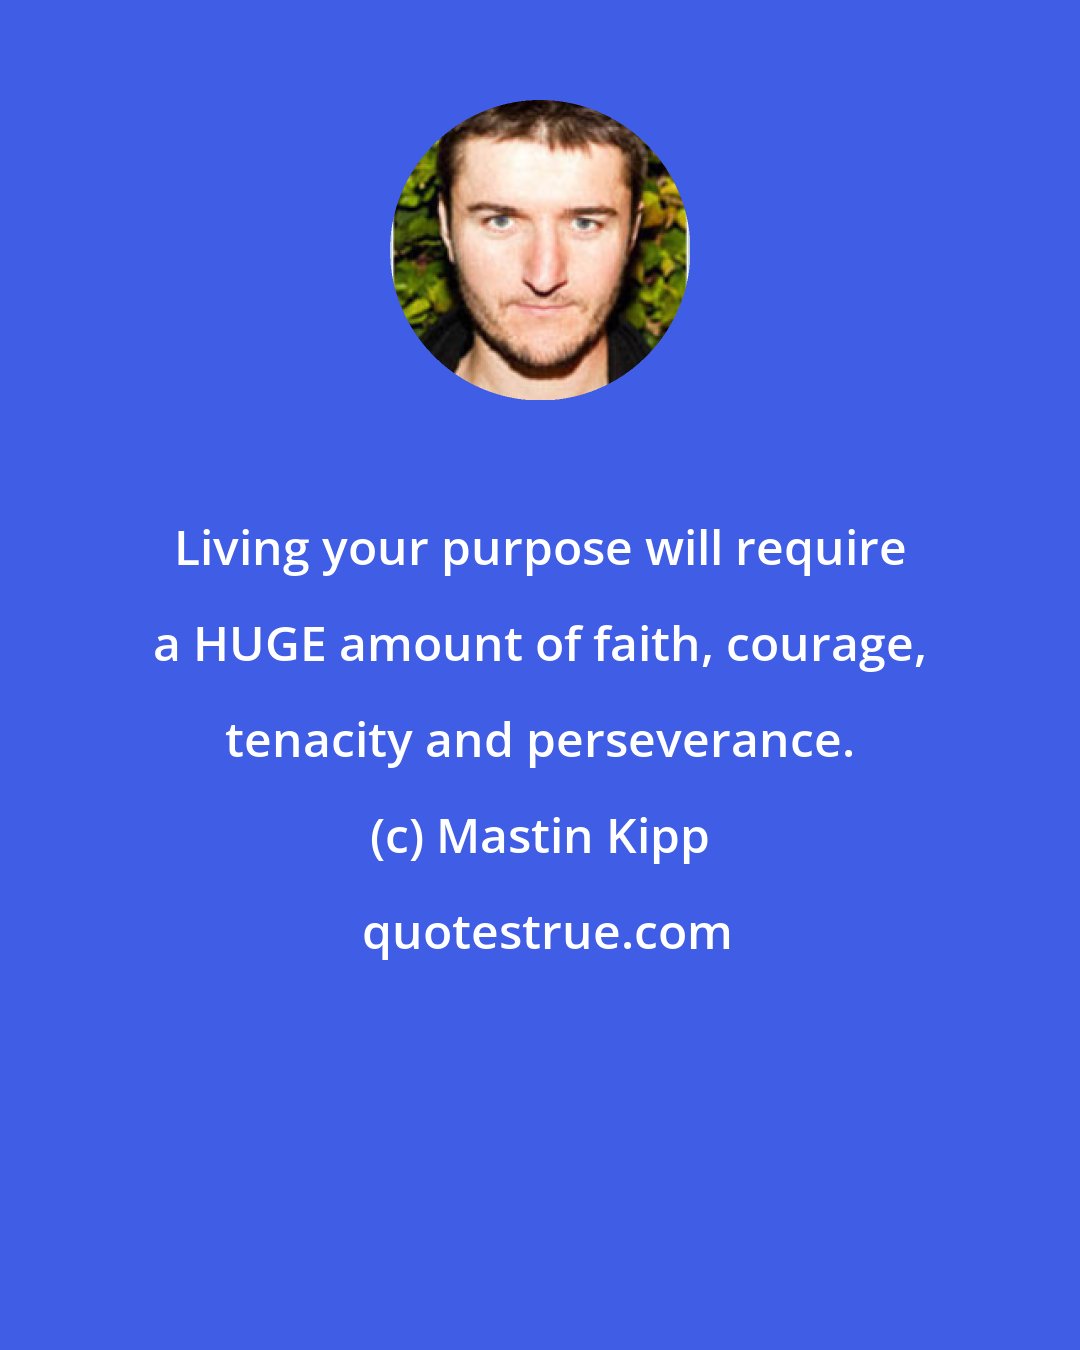 Mastin Kipp: Living your purpose will require a HUGE amount of faith, courage, tenacity and perseverance.